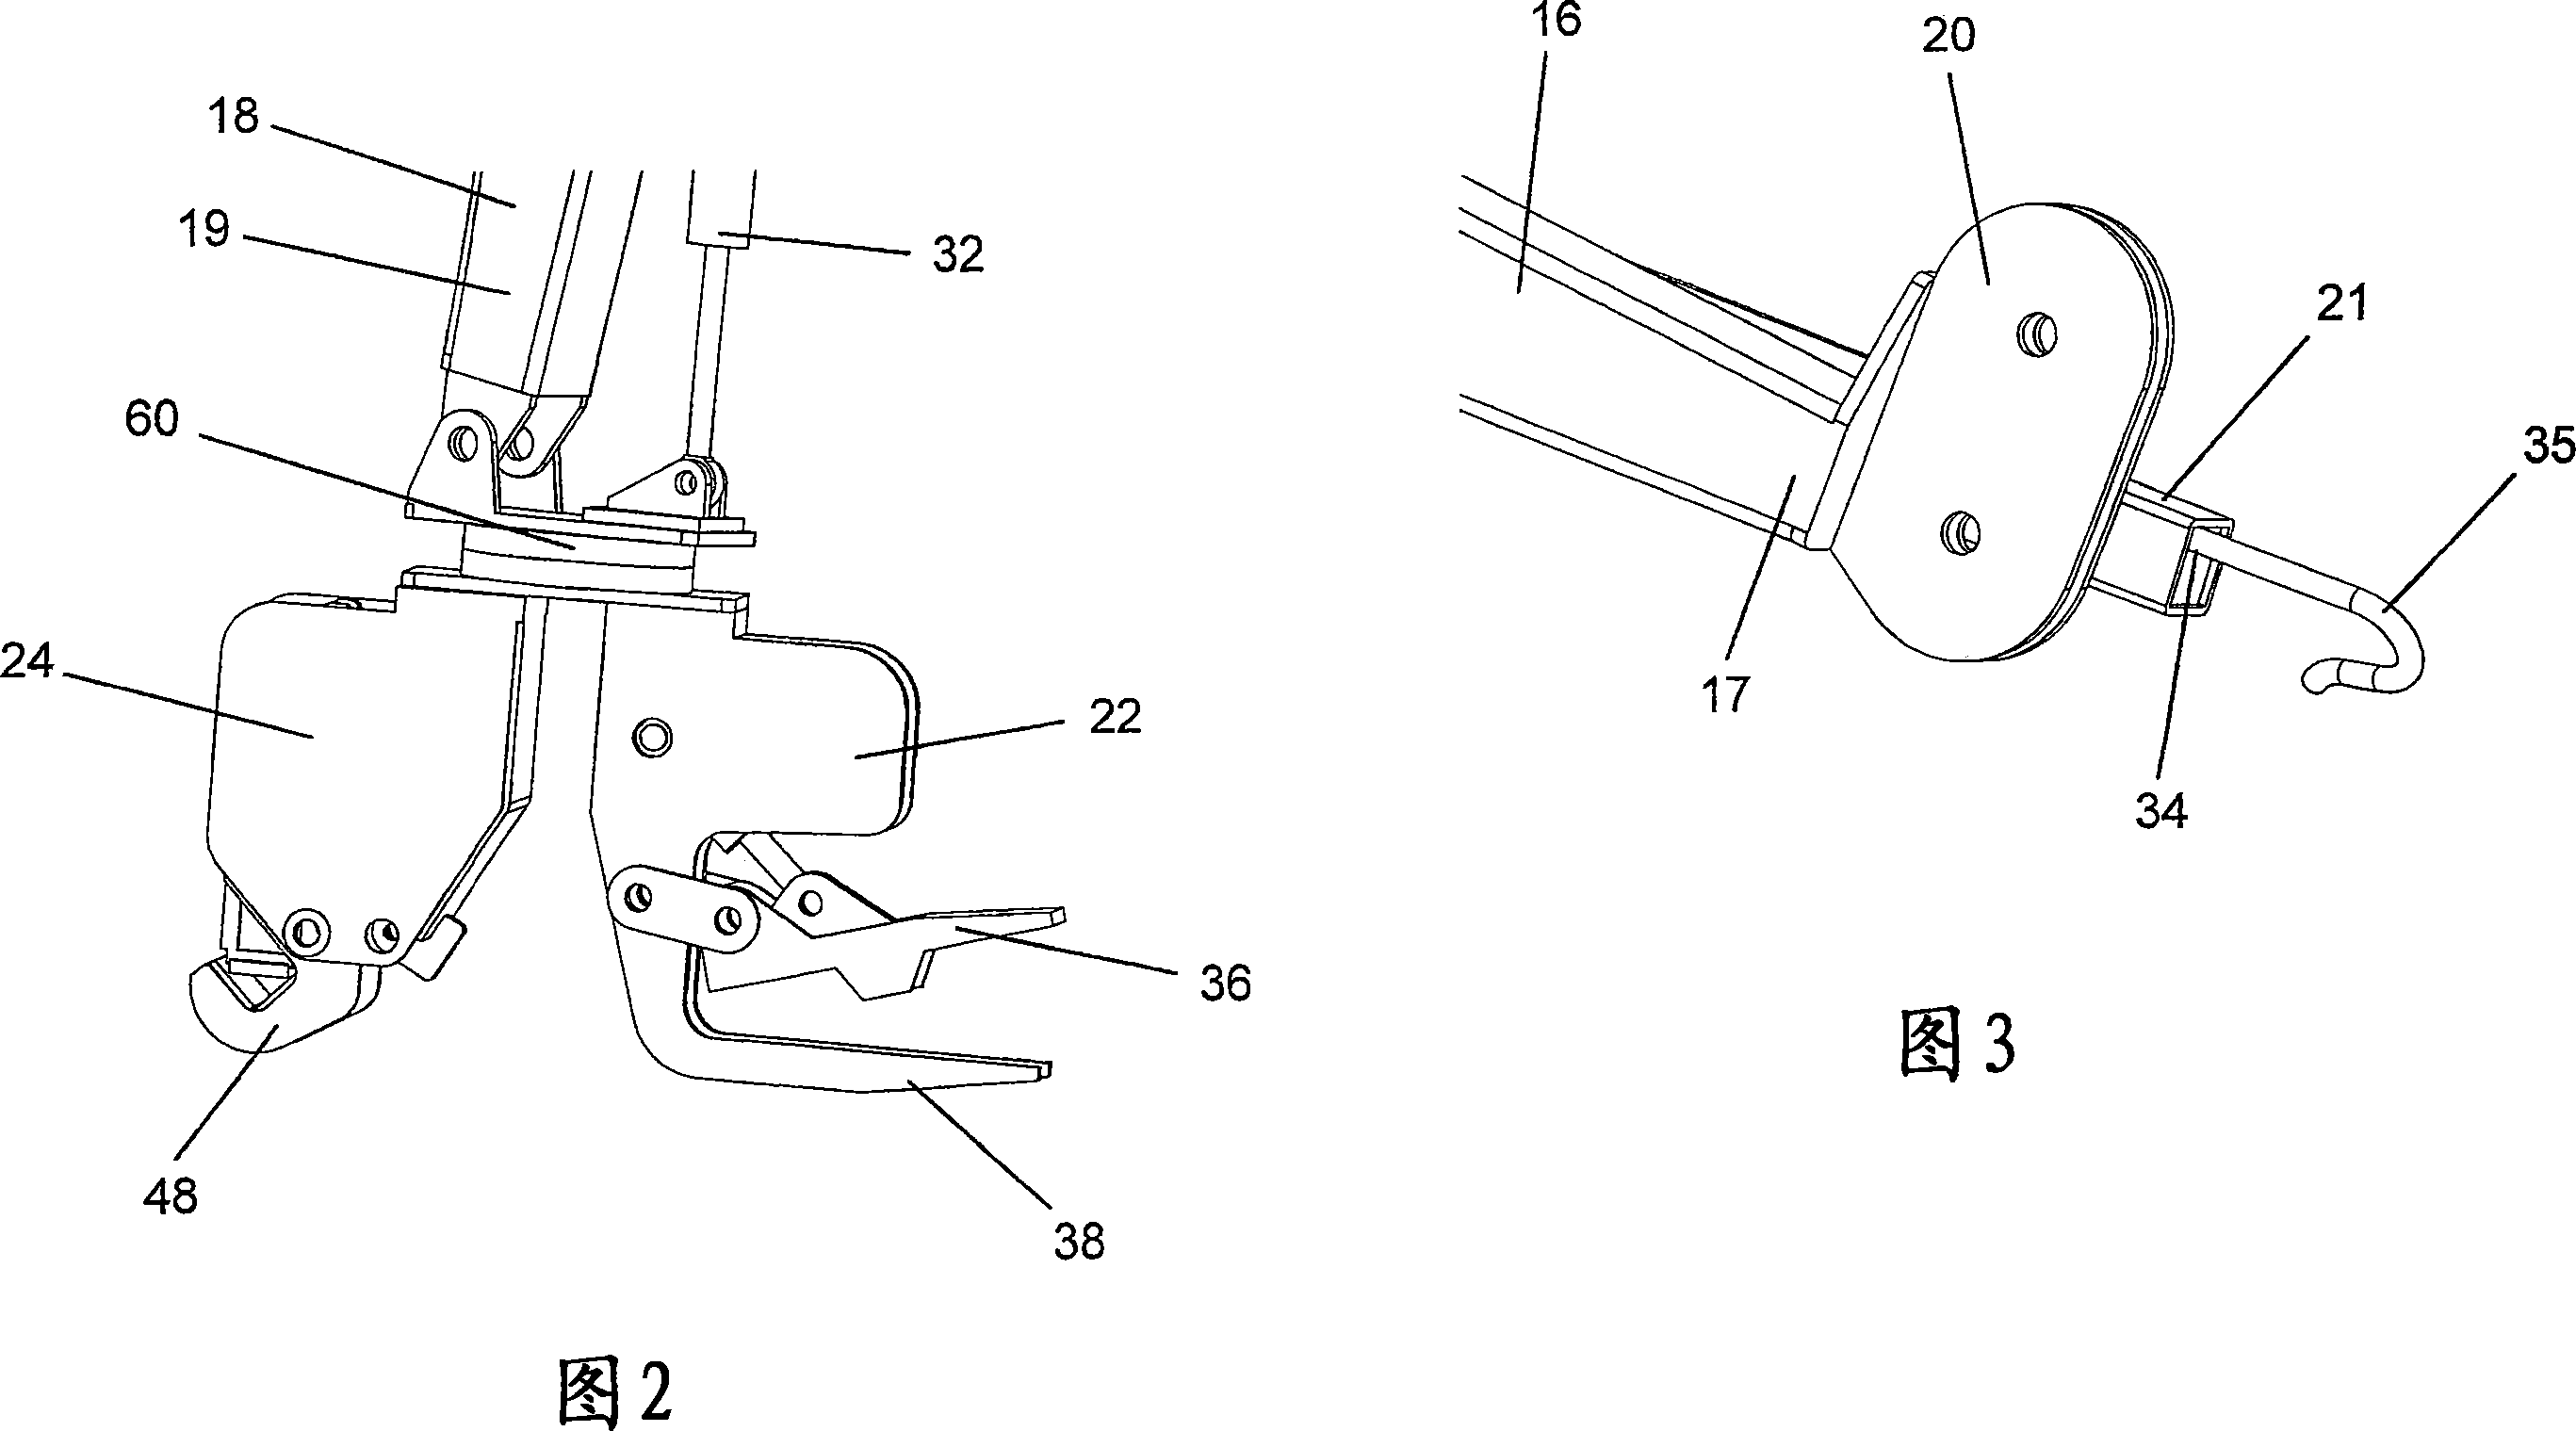 Crane for handling of chains, wires, etc., and tools for same